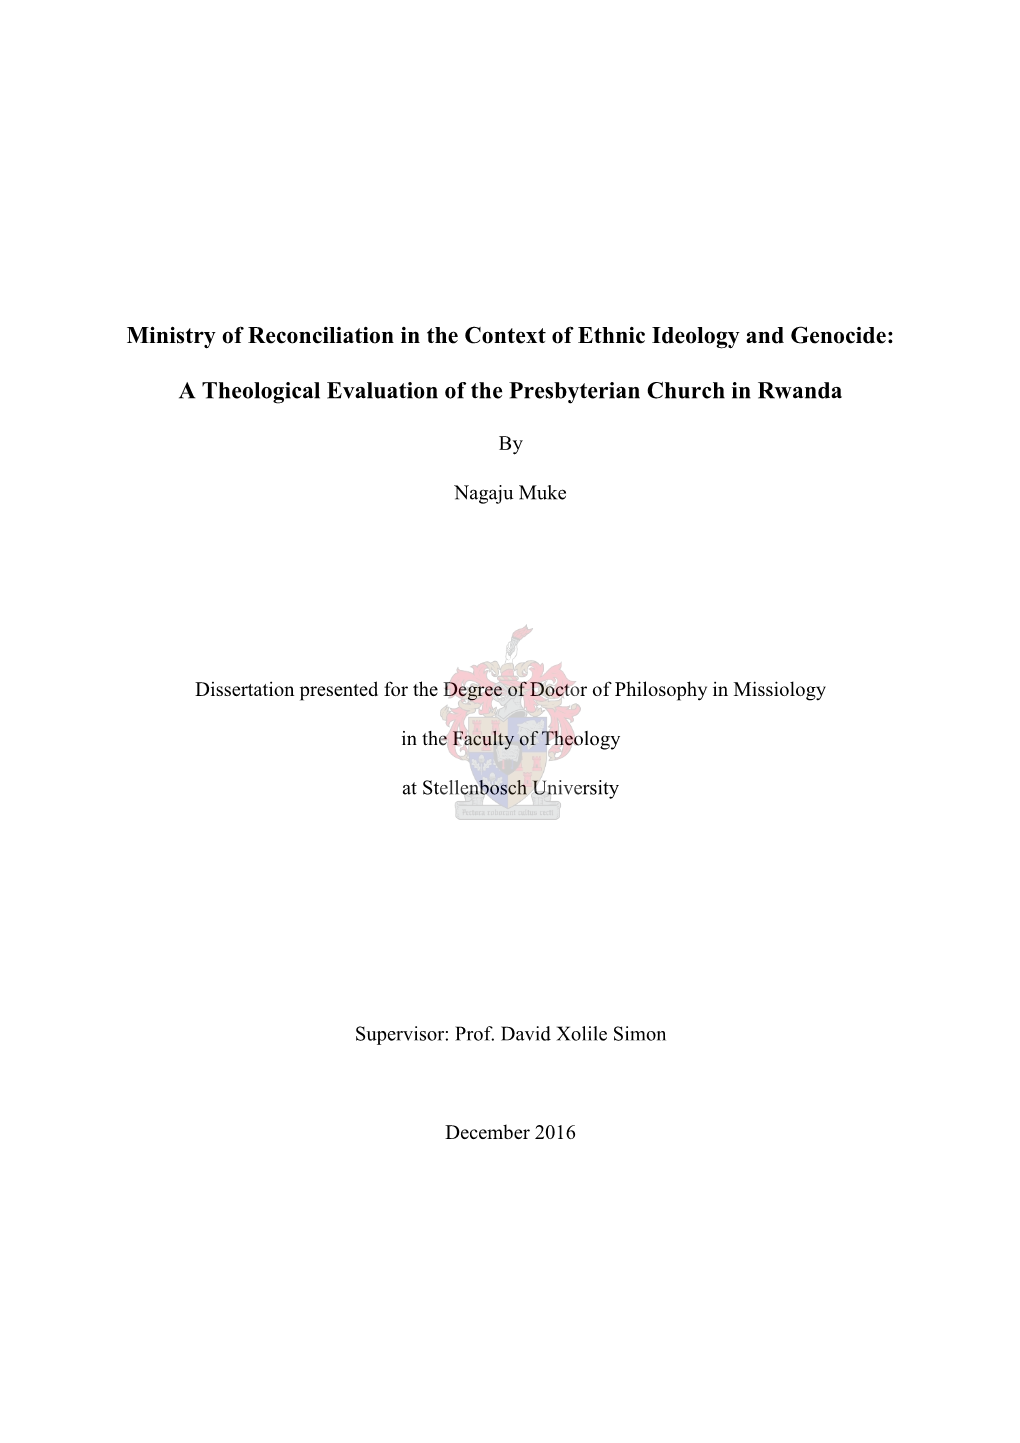 Ministry of Reconciliation in the Context of Ethnic Ideology and Genocide: a Theological Evaluation of the Presbyterian Church I